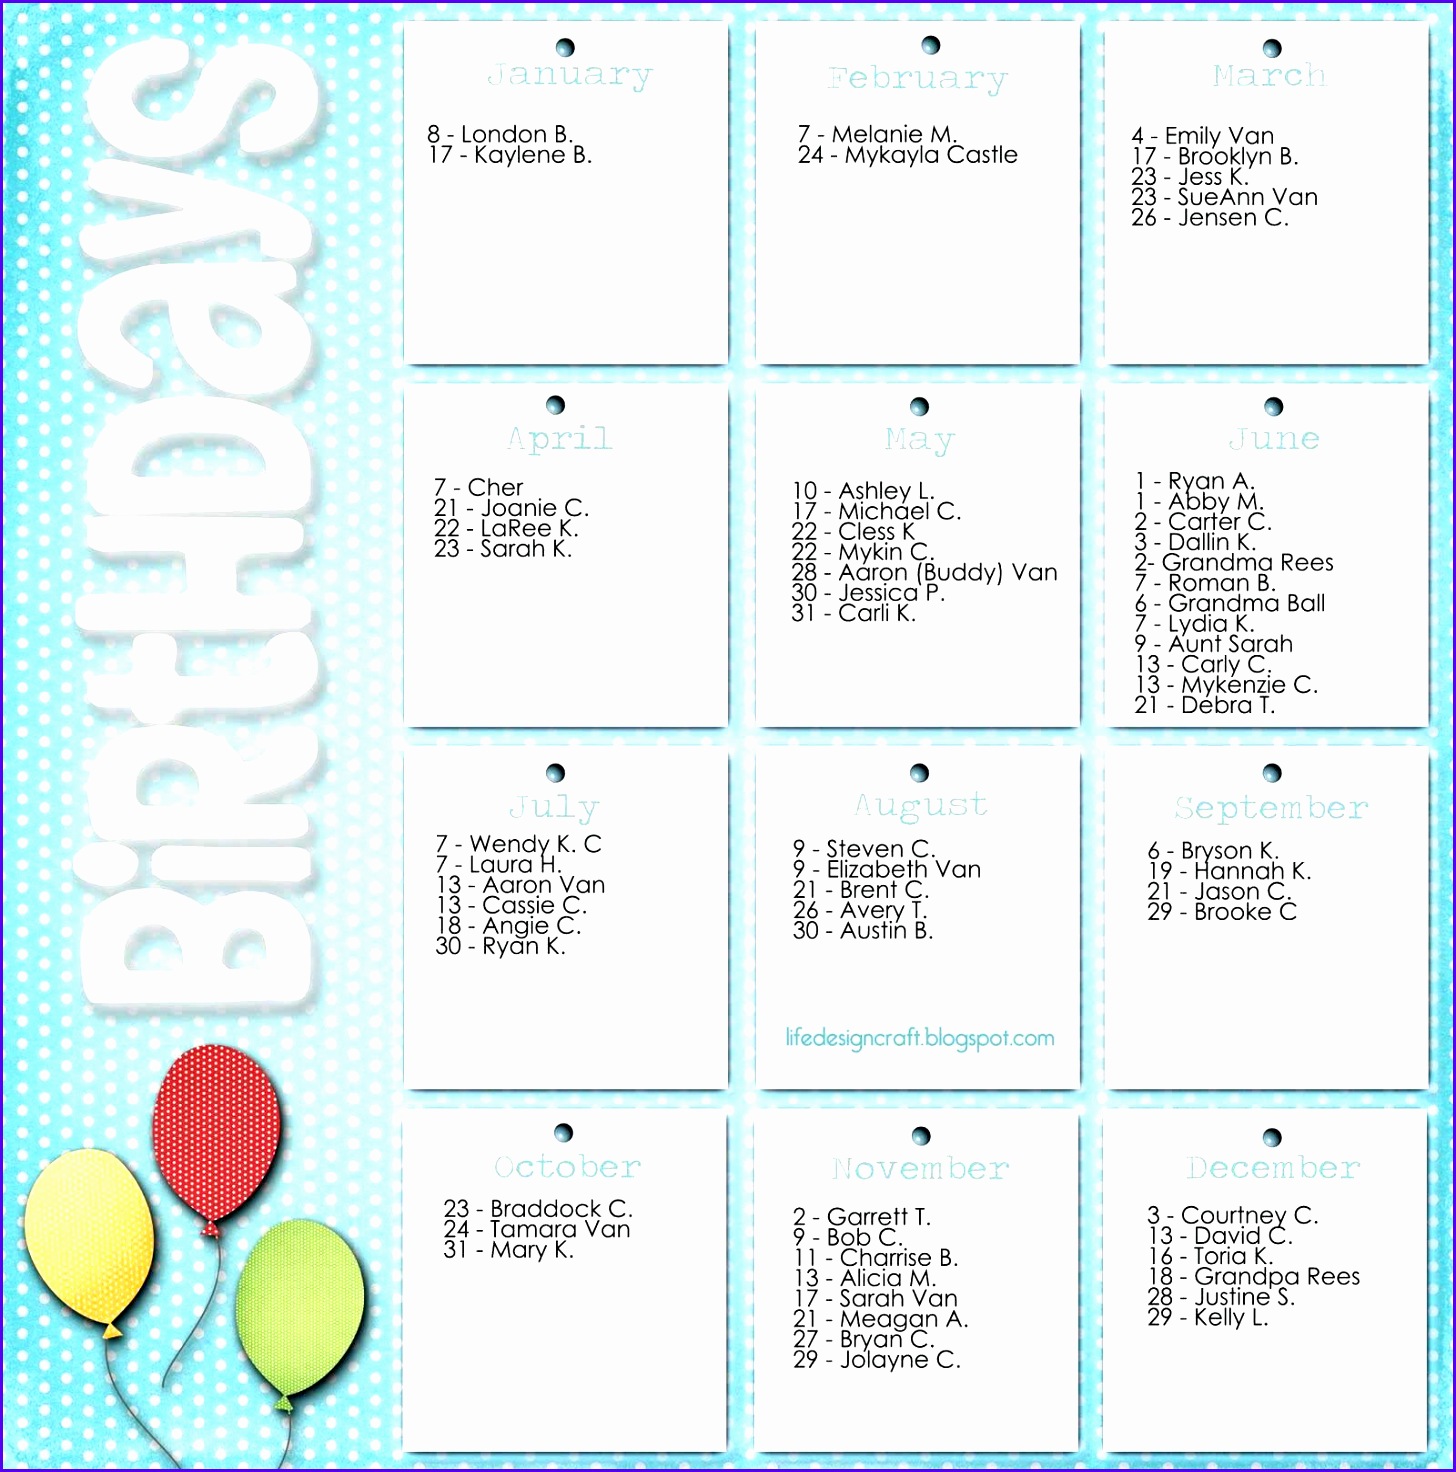 Free 3d fice Planner Free Staff Holiday Planner Excel Template 2016 Birthday Calendar Template Free Staff Holiday Planner Excel Template 2013 Uk 14561472